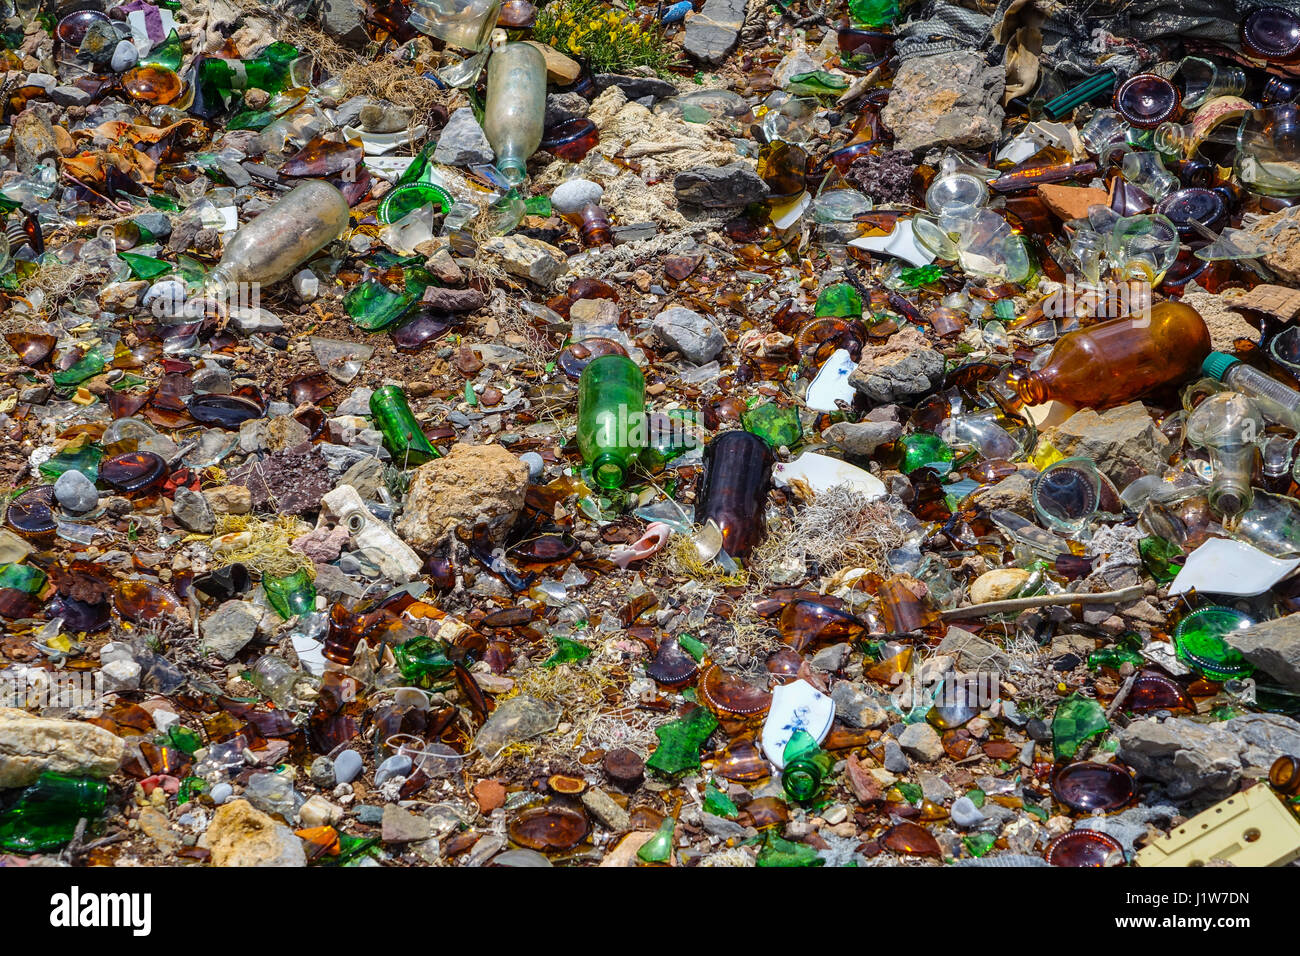 Rubbish tip, garbage, with broken glass, plastic and rusty metal, Greece Stock Photo